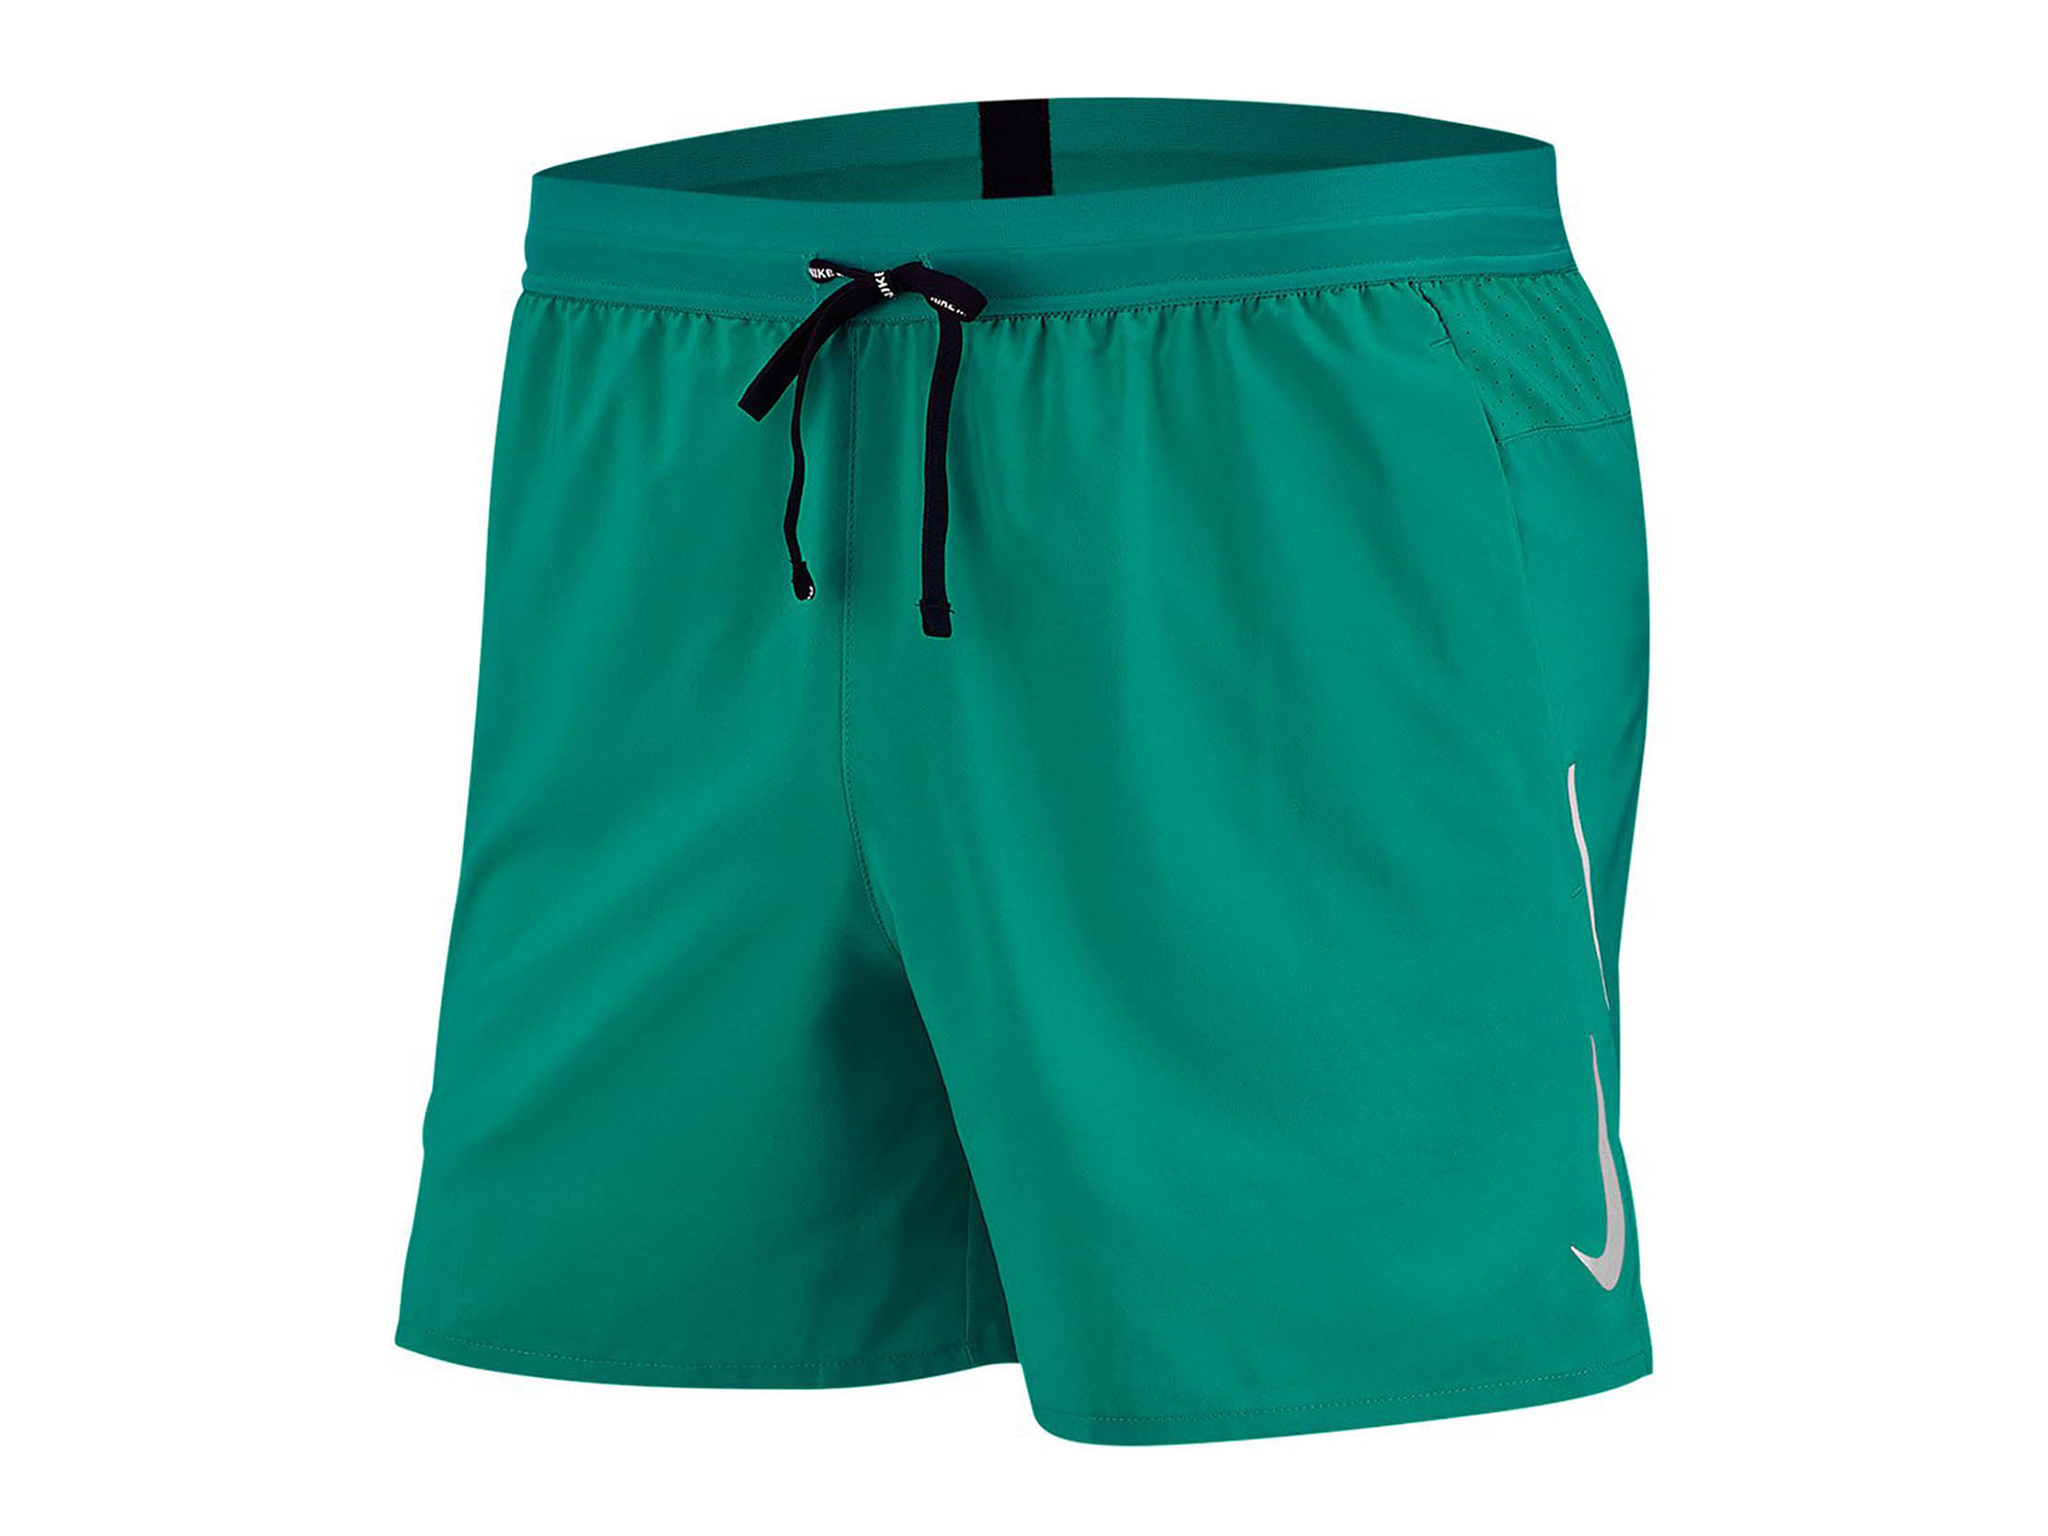 Best men’s running shorts 2021: From track to trail | The Independent